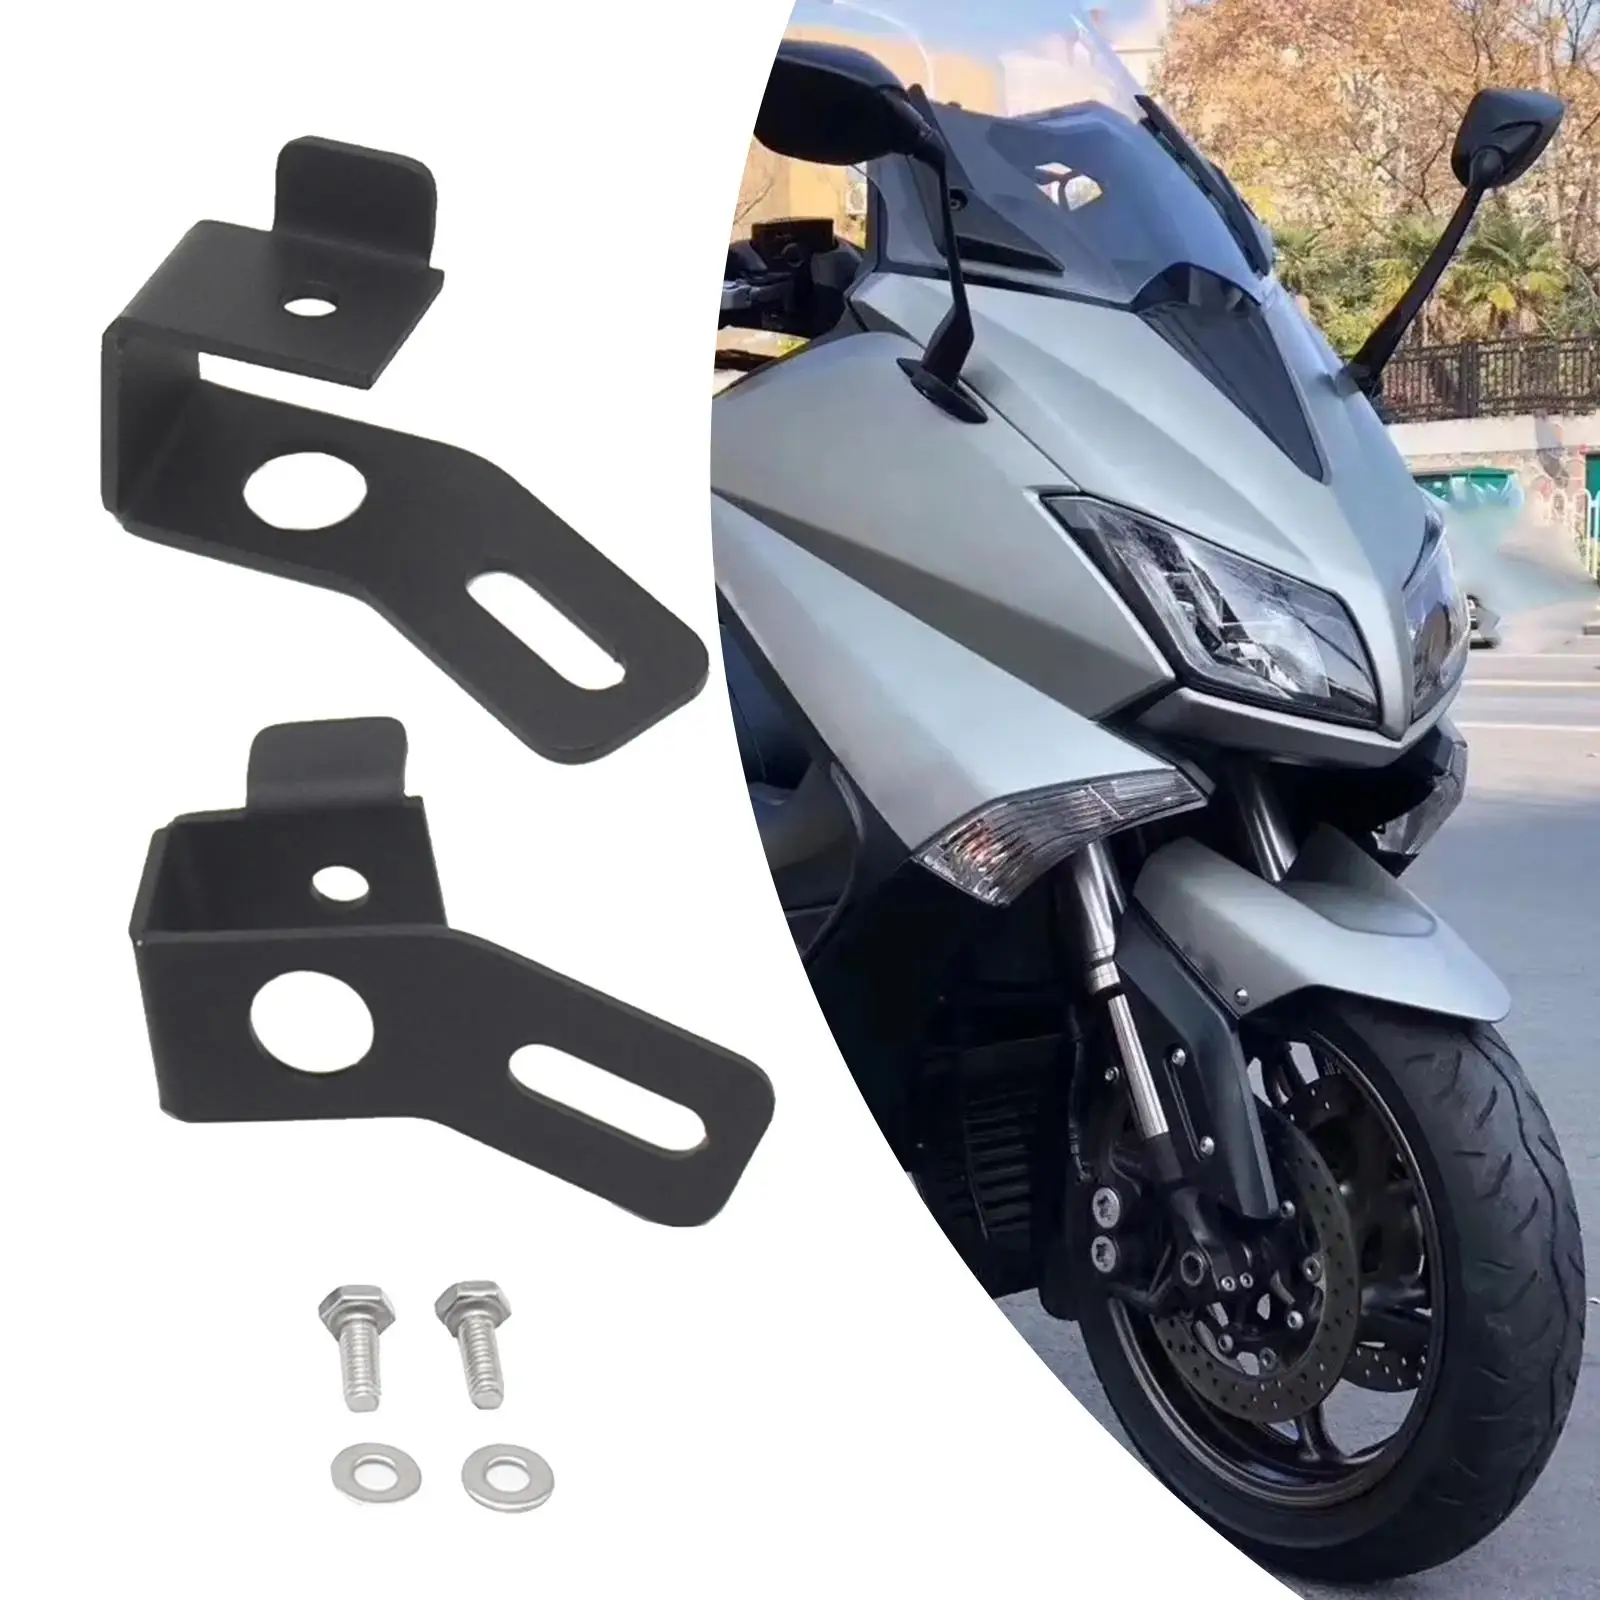 Fog Lamp Spot Lamp Auxiliary Support Accessory Replacement Attachment Professional Motorcycle Motorcycle Mounting Bracket 560